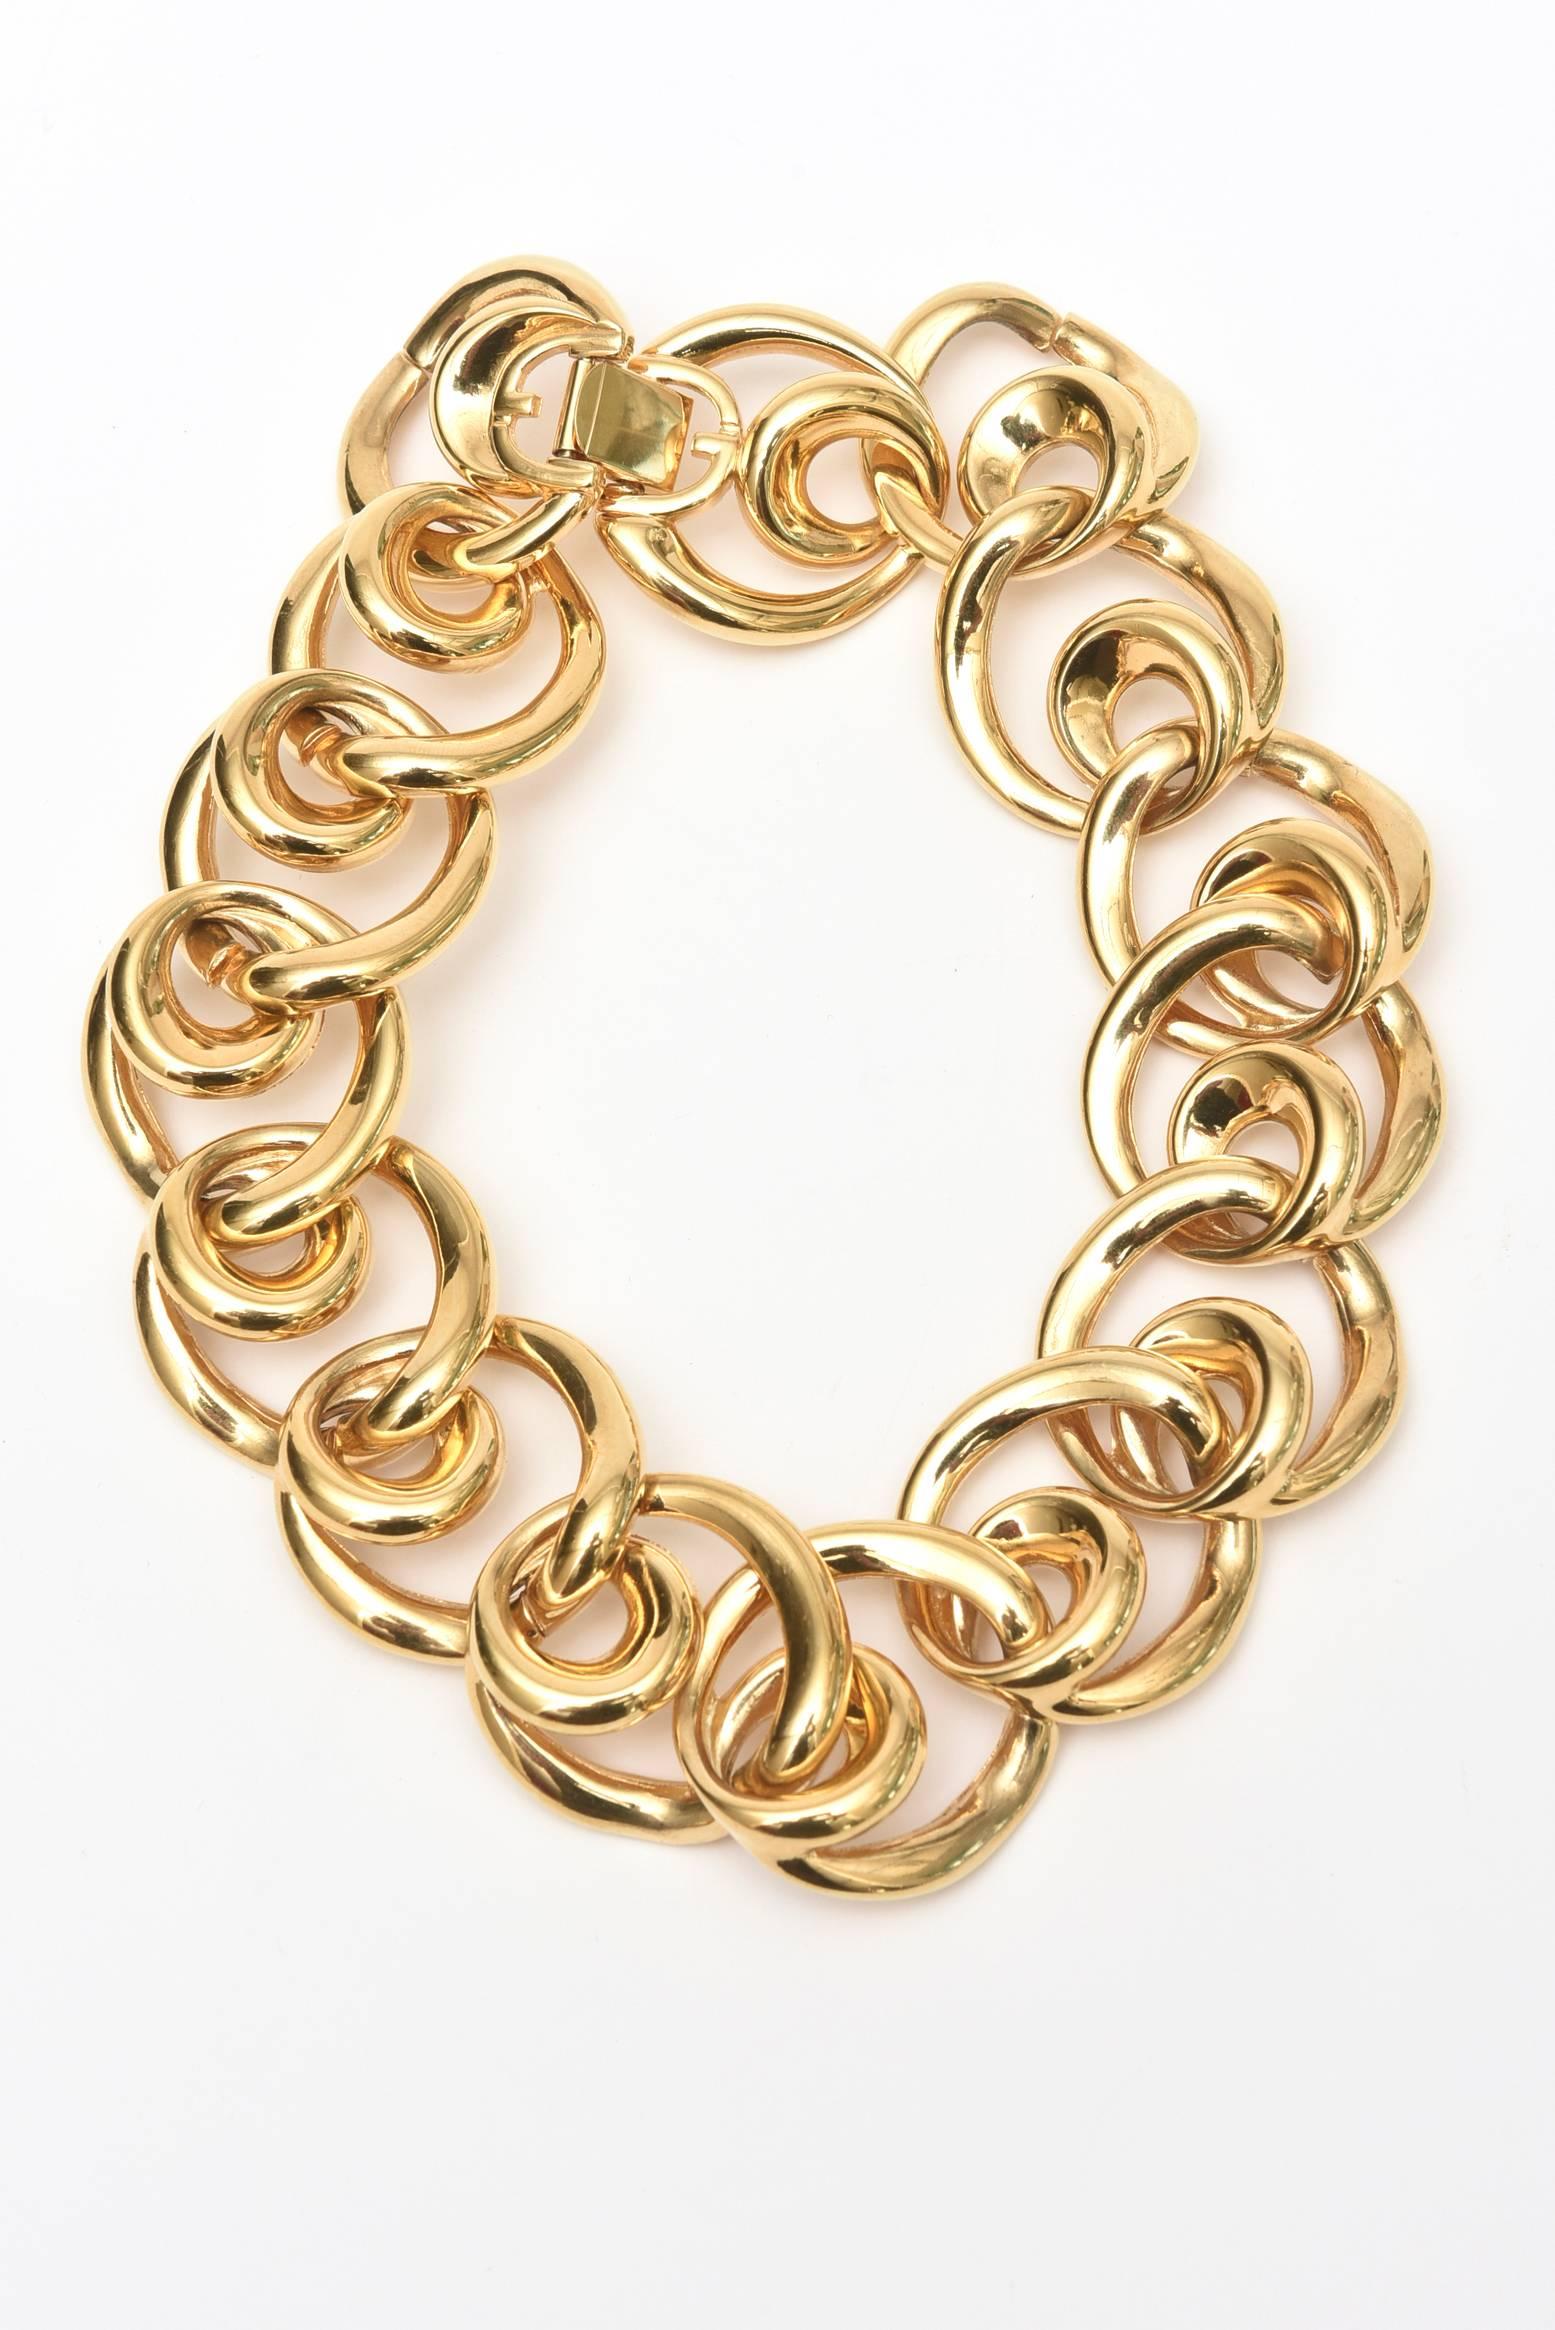 This timeless and au courant marked vintage Givenchy collar necklace with it's overlay connecting beautiful gold plated large links has a matching pair of clip on earrings, sold as a set. Please. They can be worn separately. The substantial large